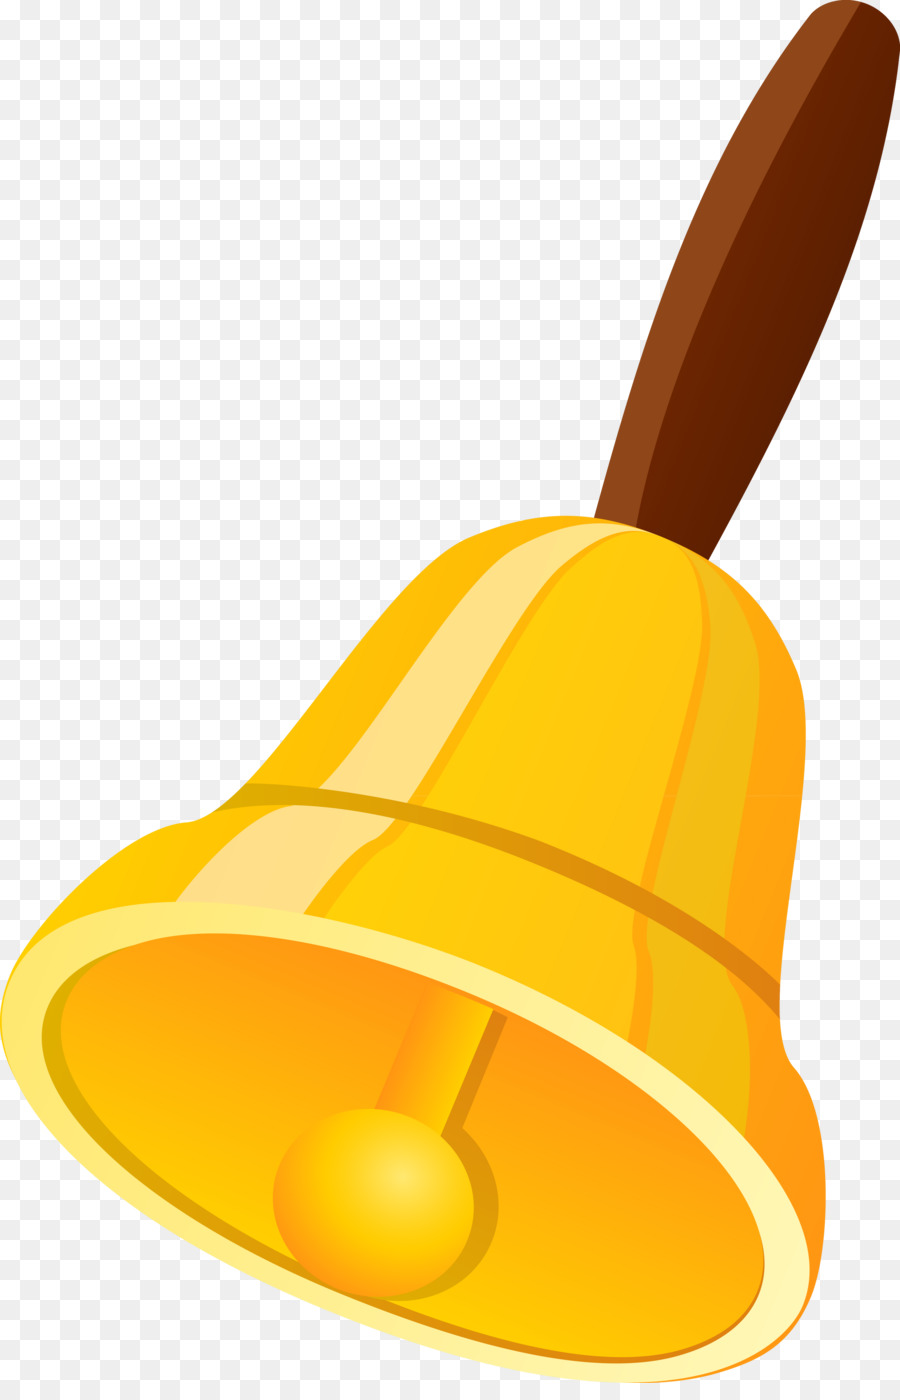 Bell clipart. School yellow product line